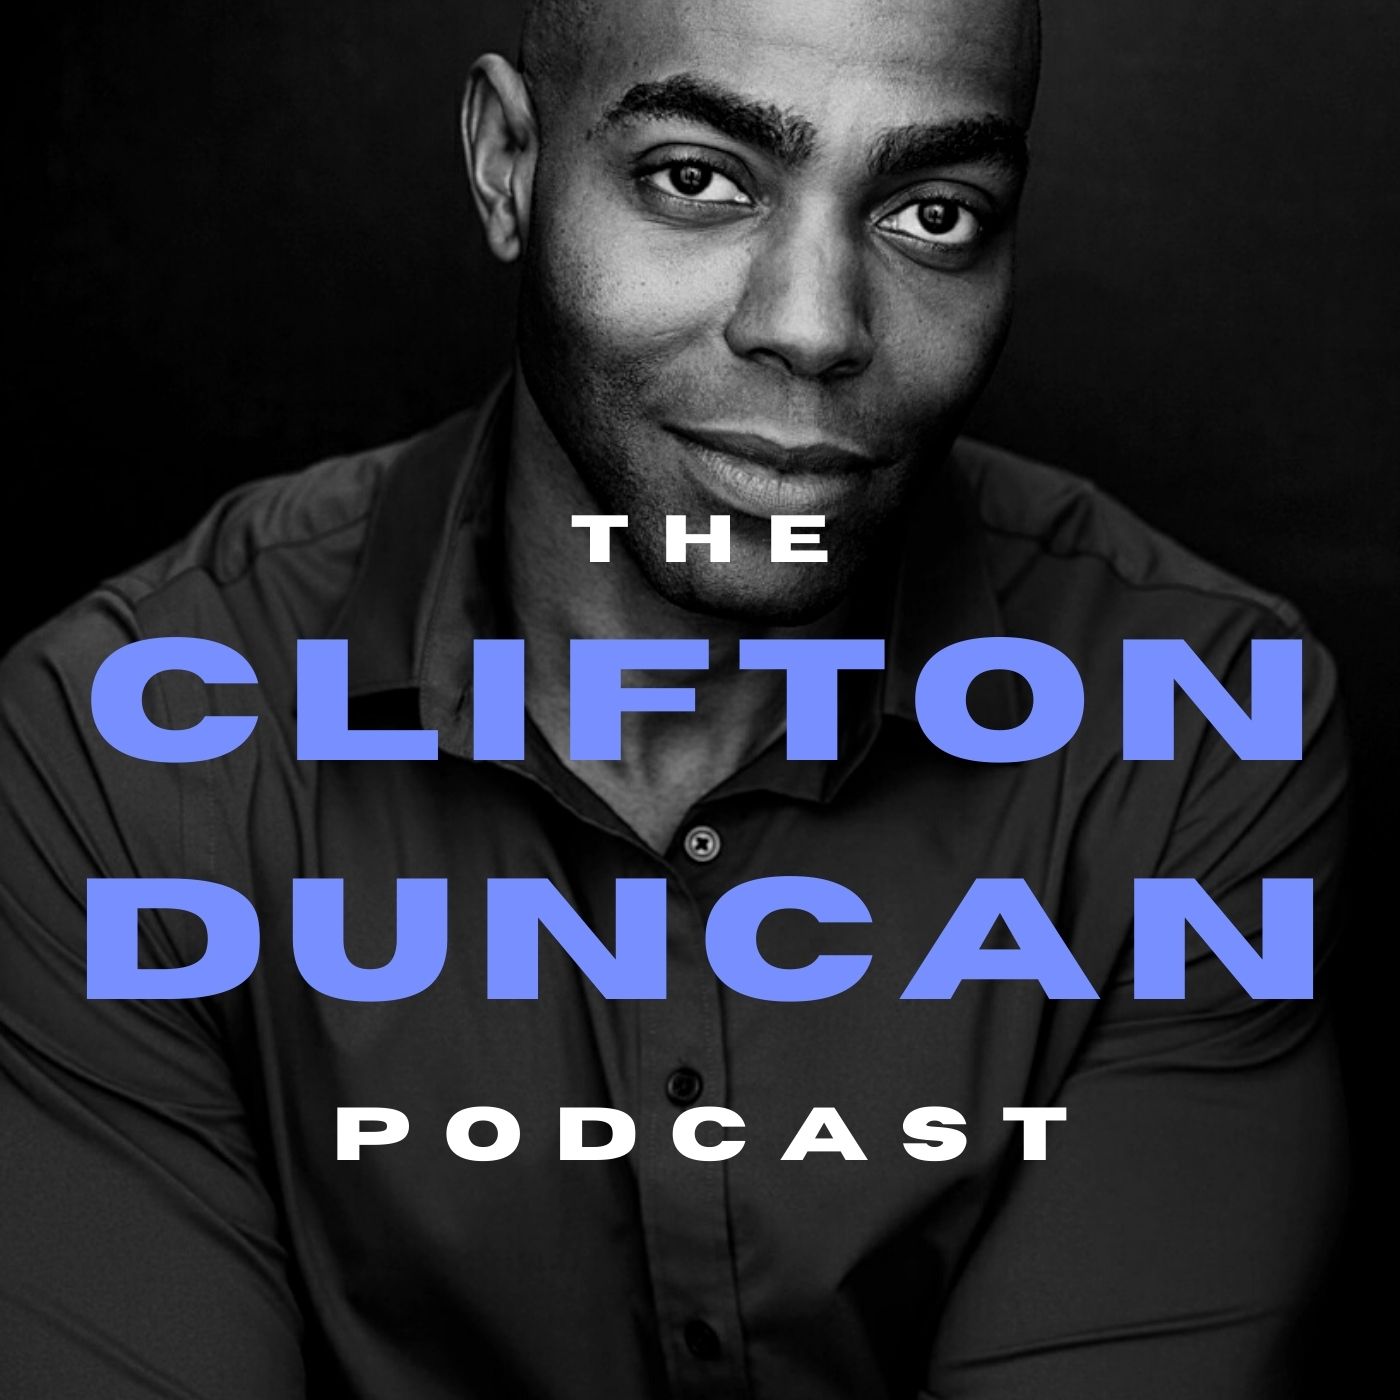 Artwork for podcast The Clifton Duncan Podcast